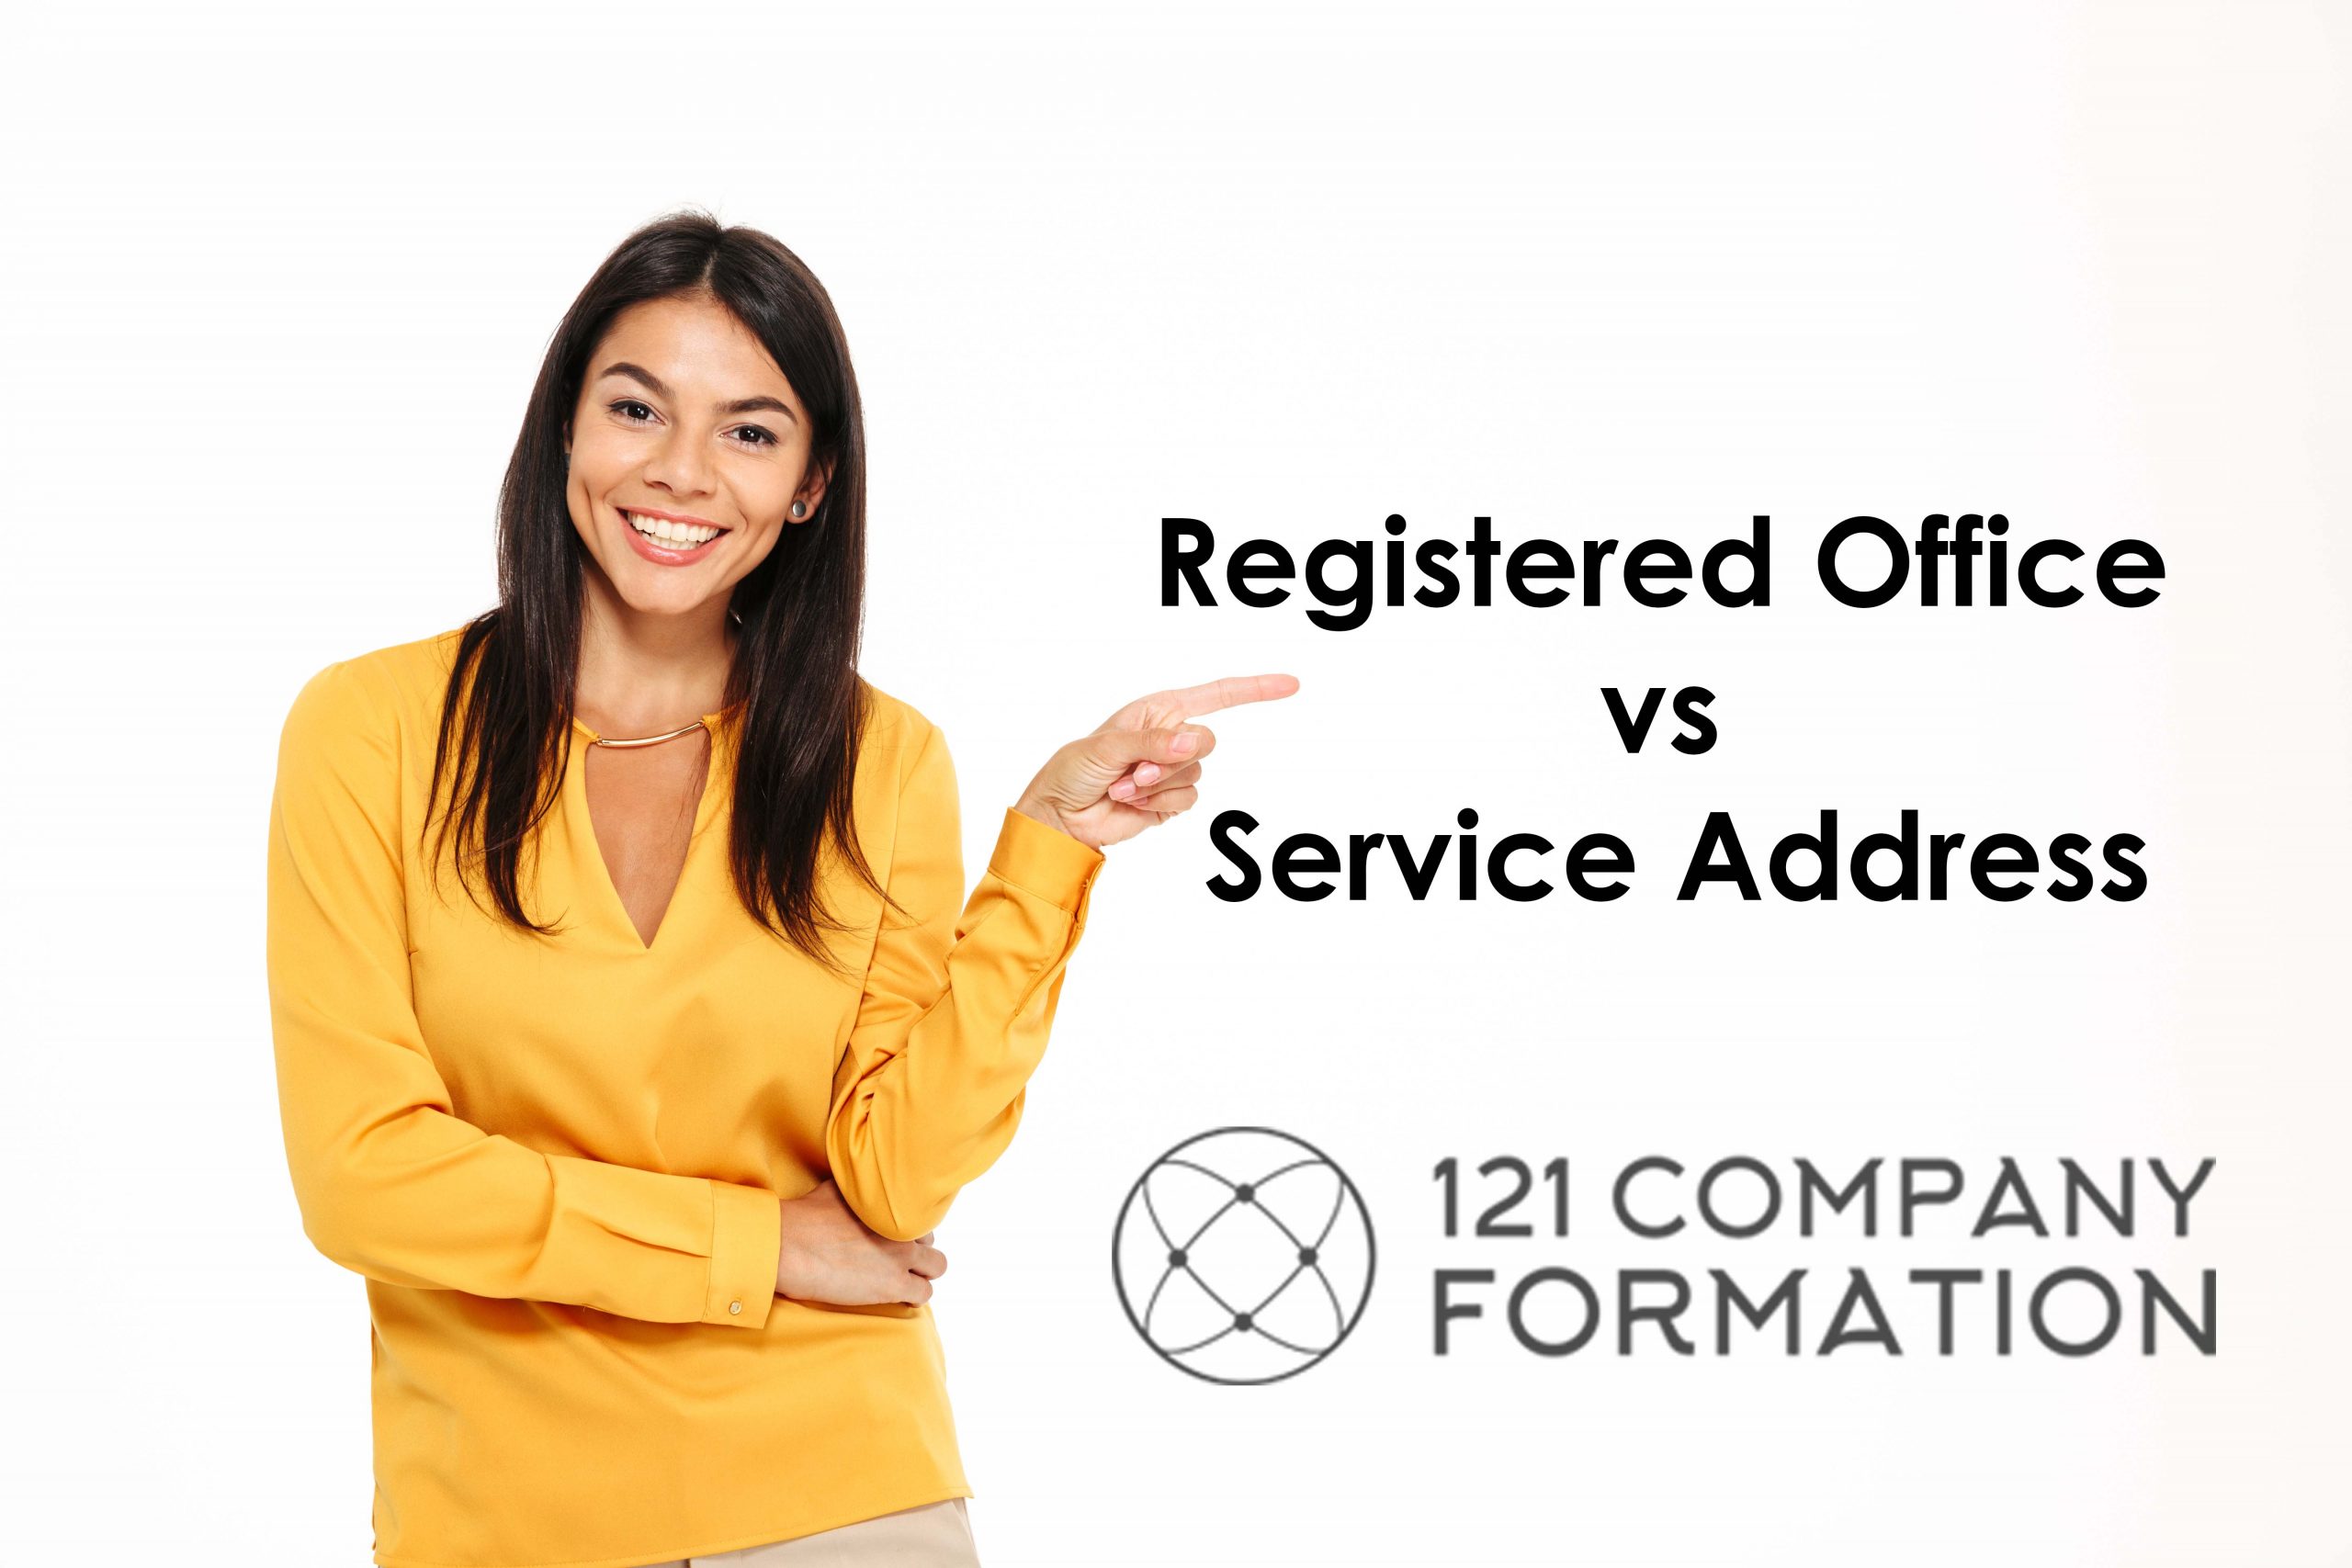 Registered Office vs Service Address - What's the Difference?